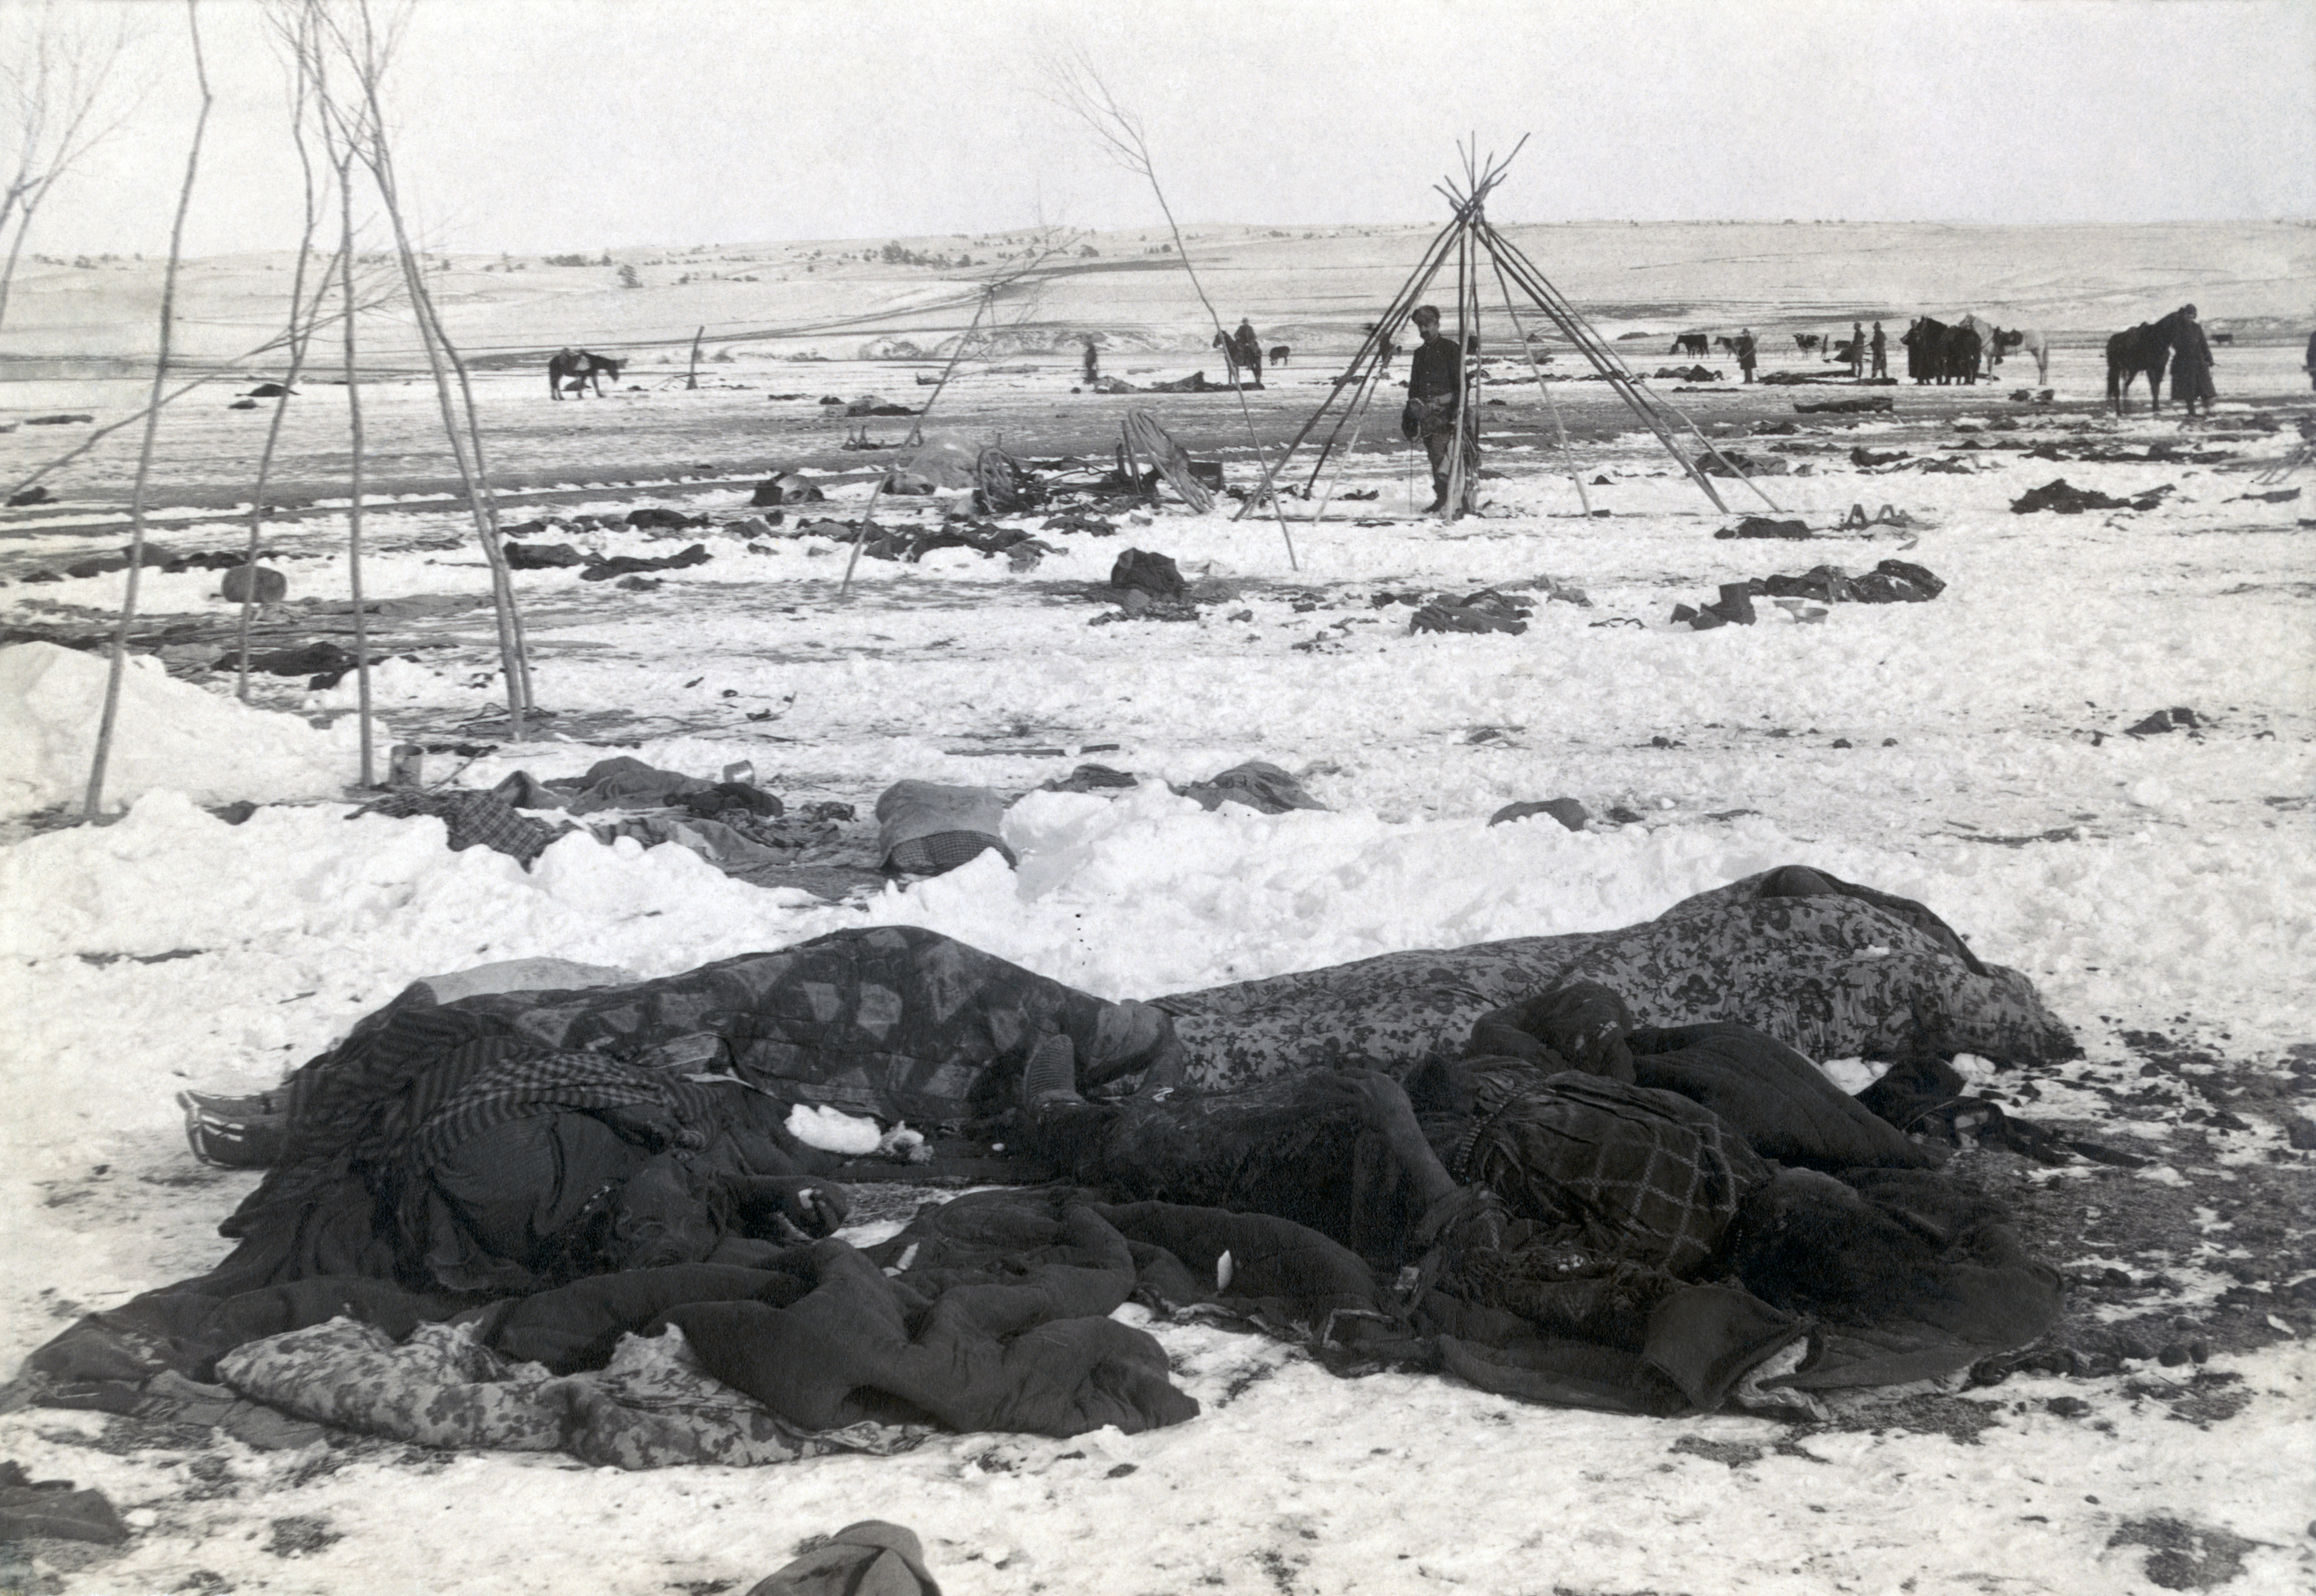 In January 1891, the bodies of four Lakota Sioux are seen wrapped in blankets, three weeks after the Dec. 29 massacre by U.S. forces at Wounded Knee River on the Pine Ridge reservation in South Dakota. (Library of Congress)